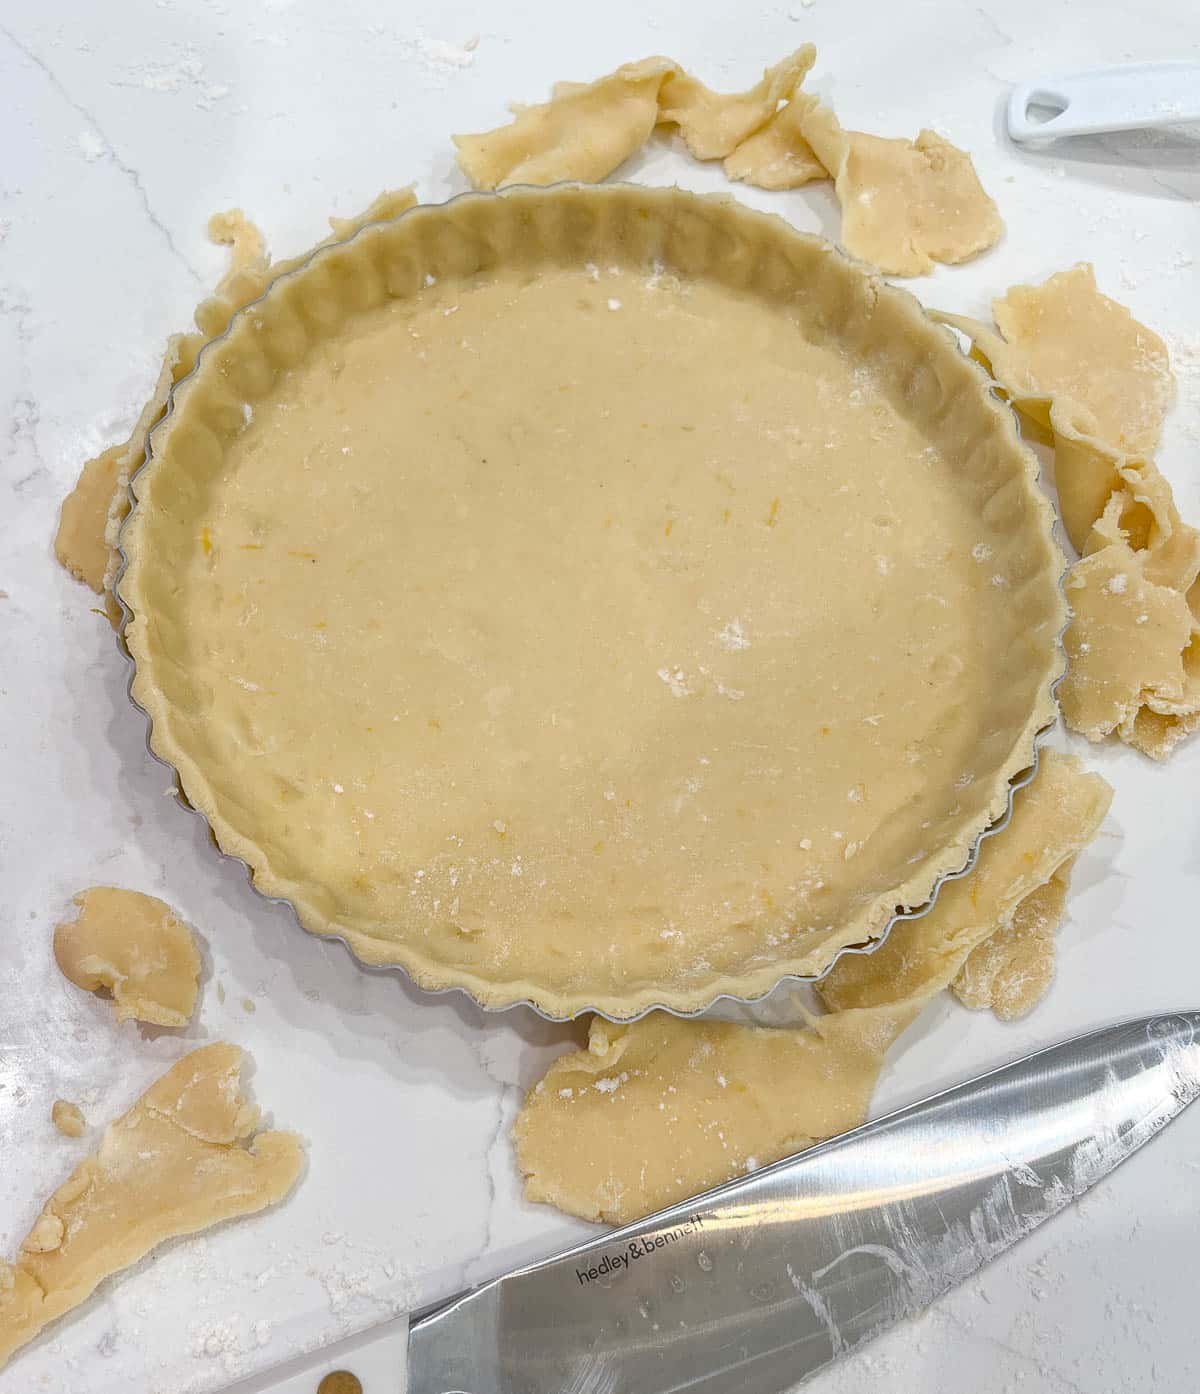 tart dough in a tart pan with leftovers trimmed off